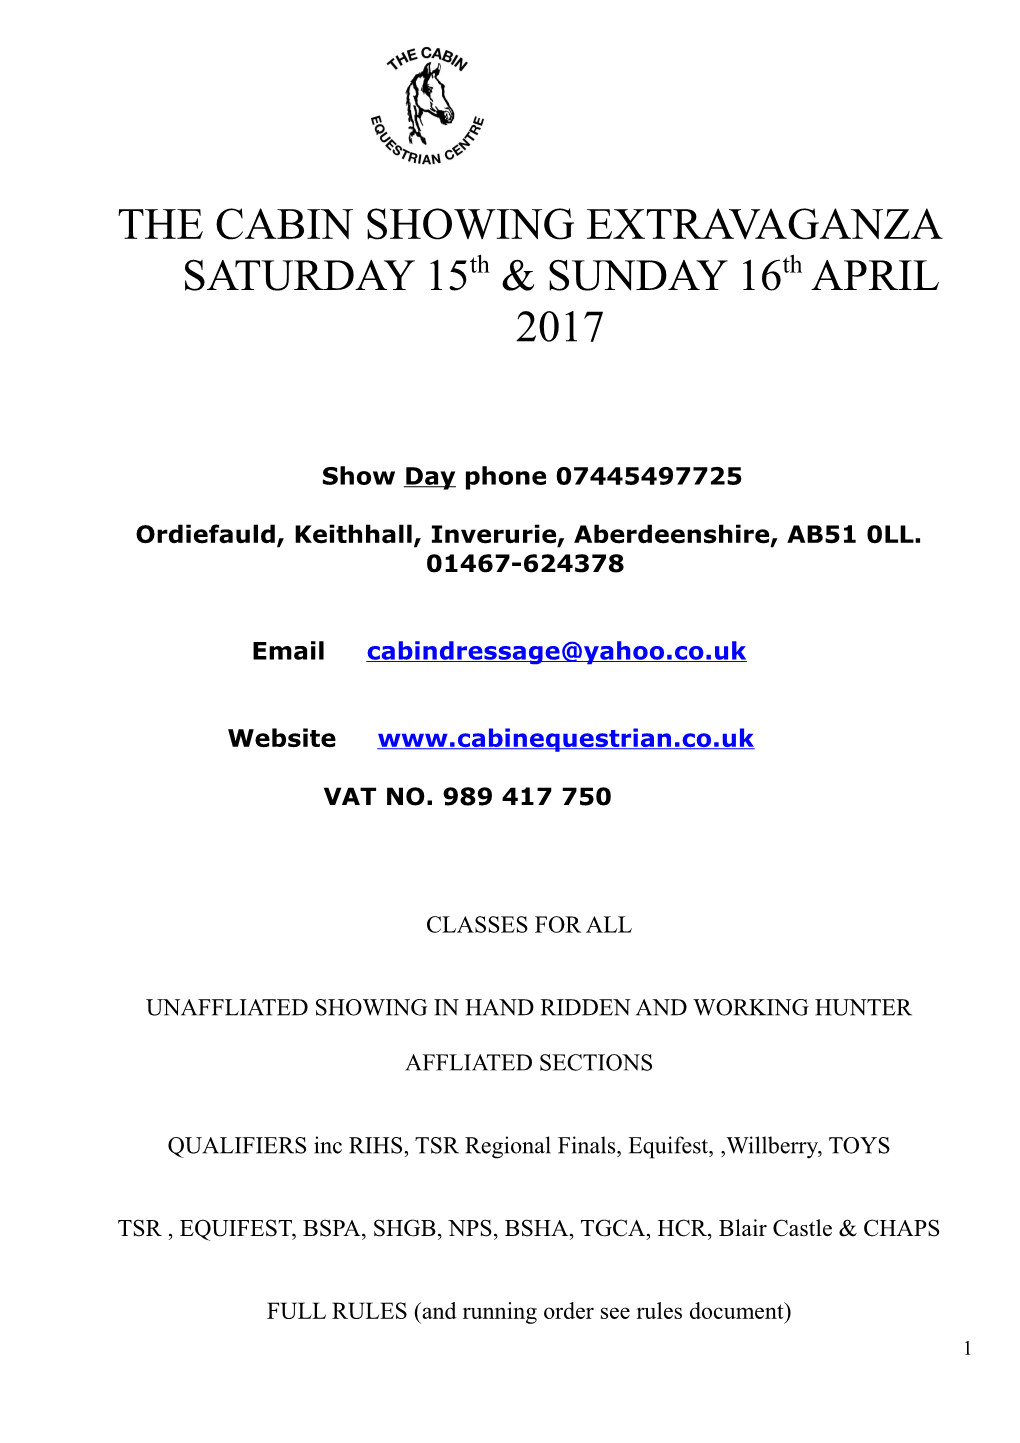 THE CABIN SHOWING EXTRAVAGANZA SATURDAY 15Th SUNDAY 16Th APRIL 2017